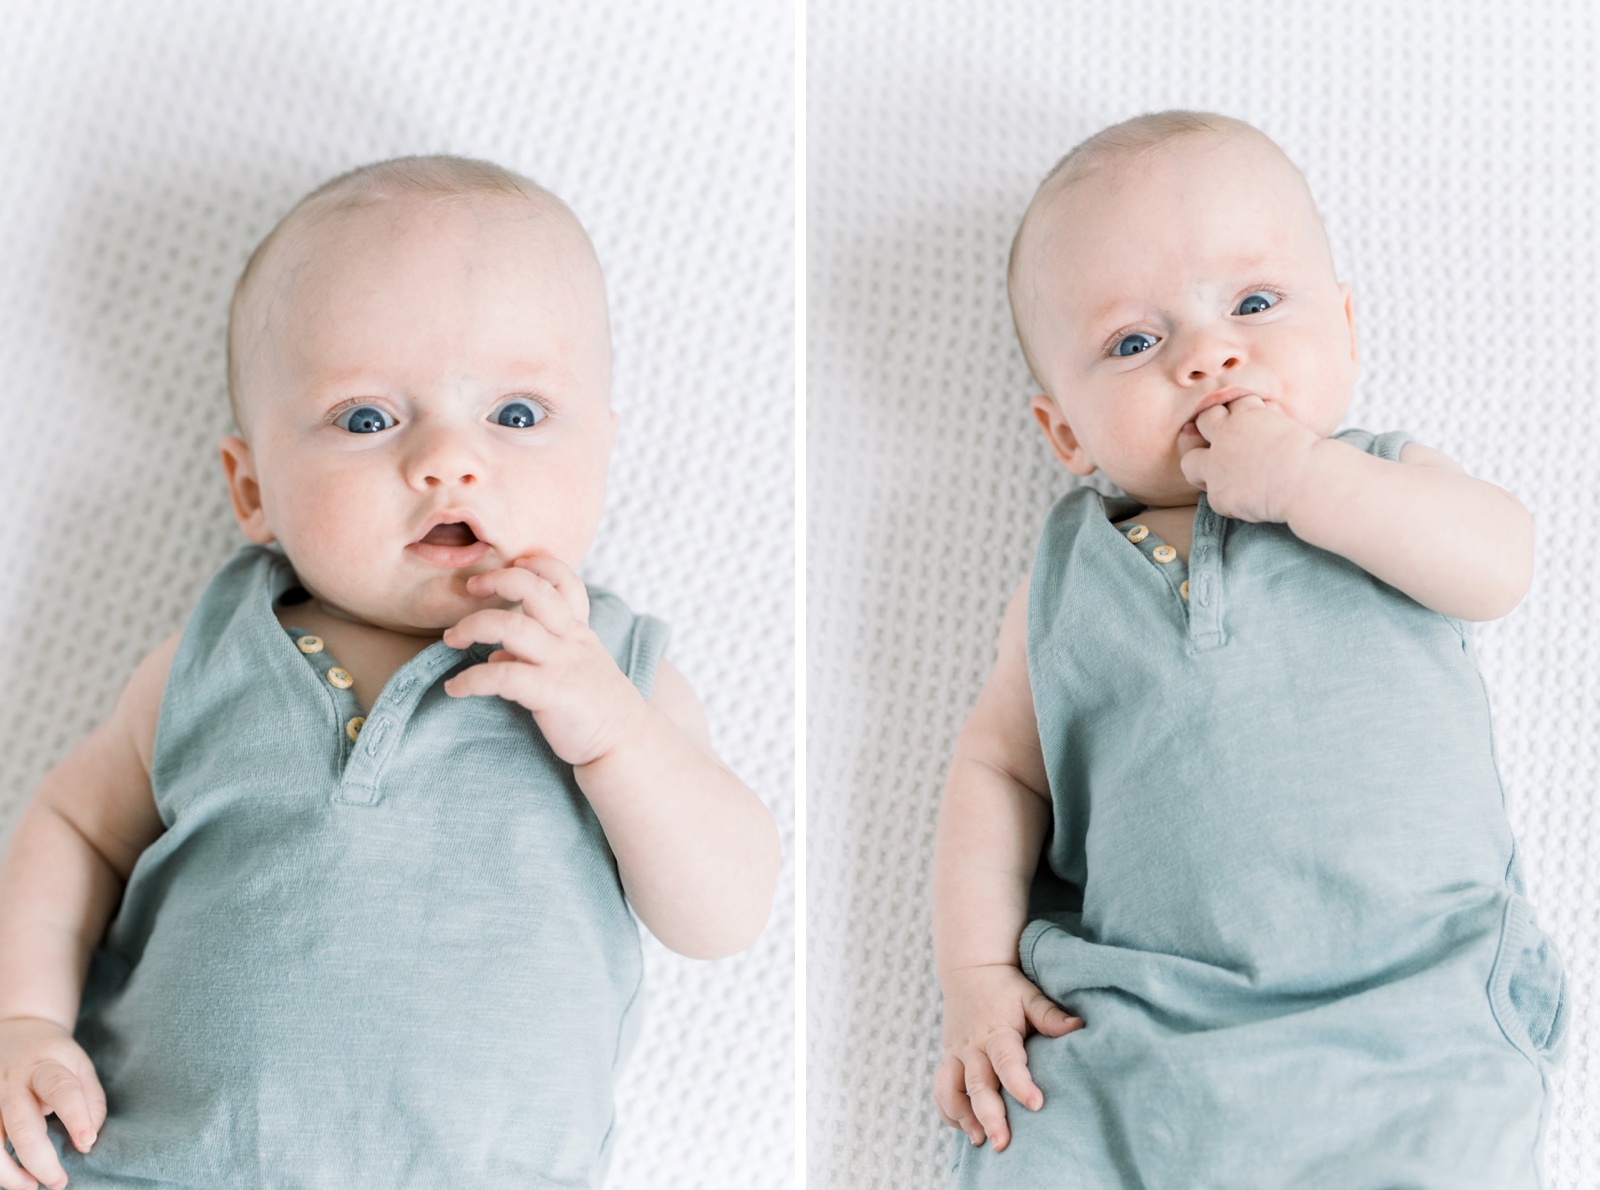 sweet-baby-james-allen-4-and-5-months-old-photo_7605.jpg